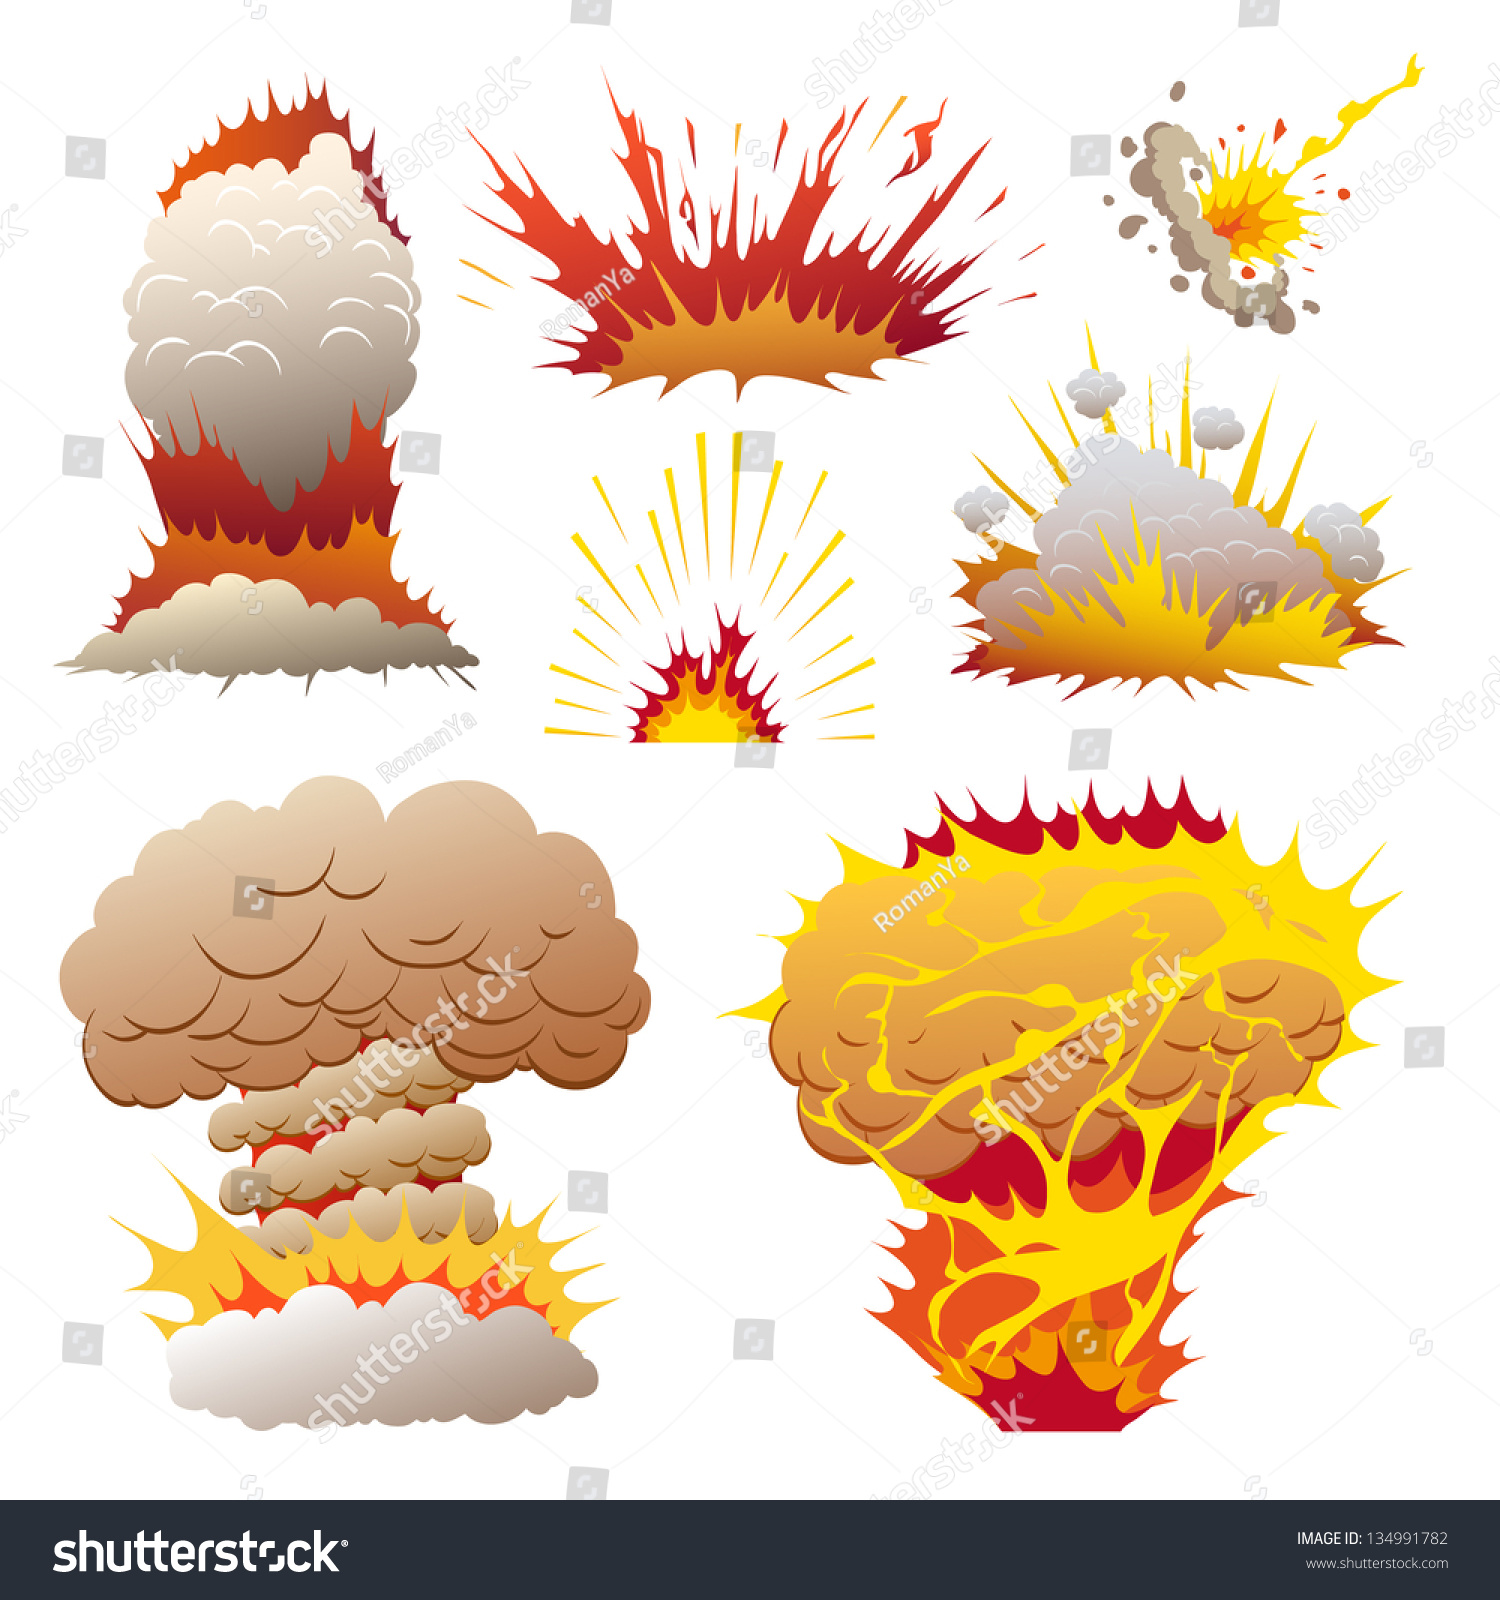 Comic Book Set Of Explosions, Vector Illustration - 134991782